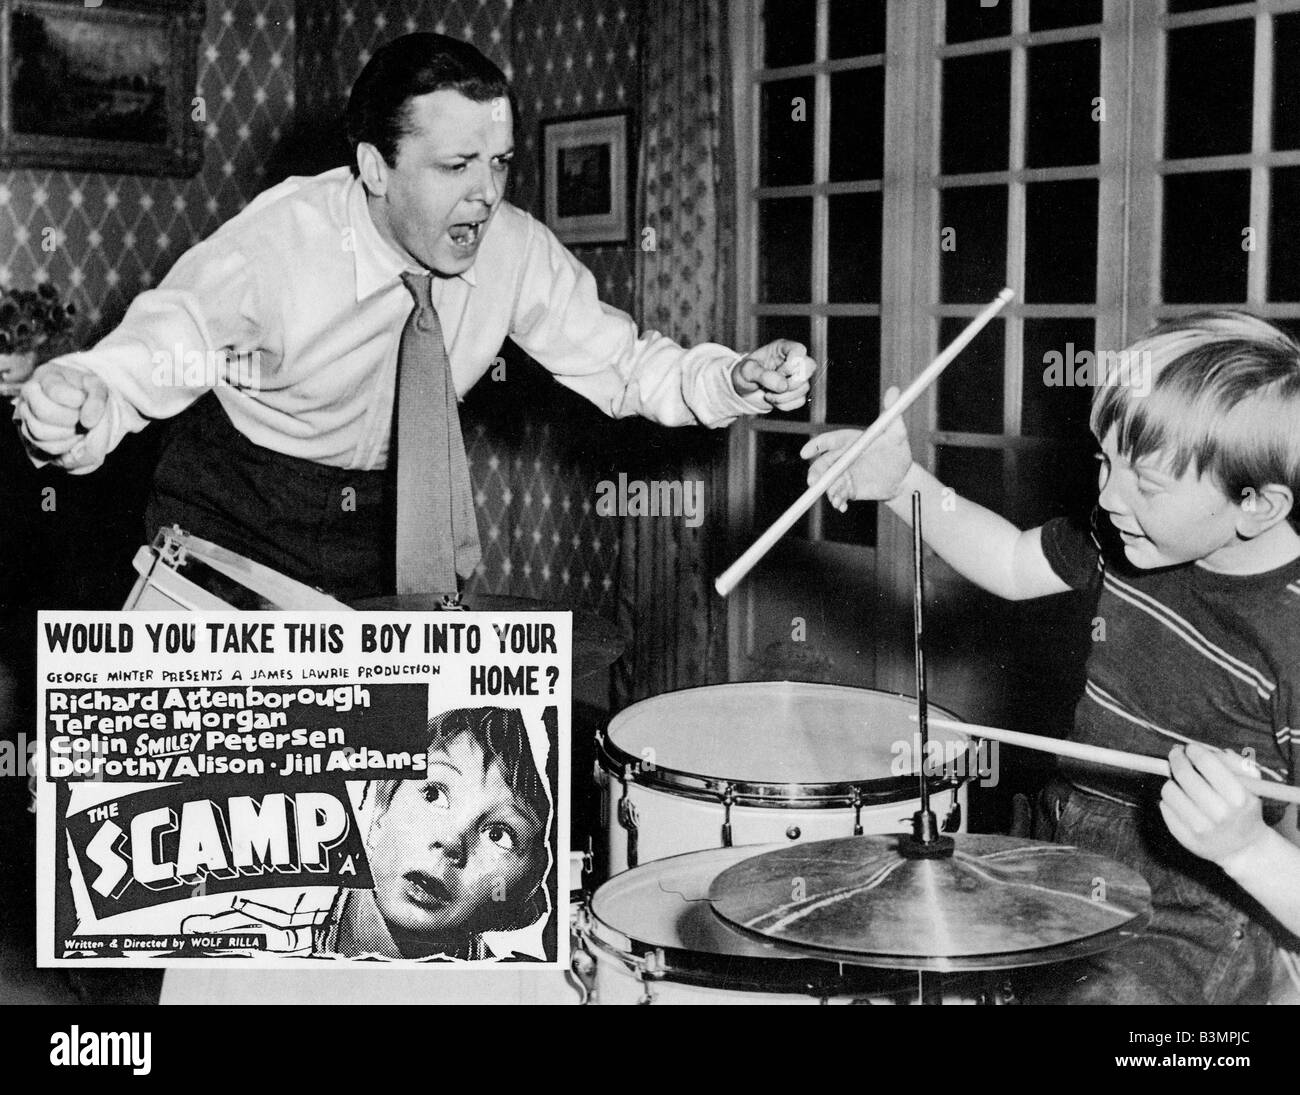 THE SCAMP 1957 Minter film with Richard Attenborough at left and Colin Petersen Stock Photo